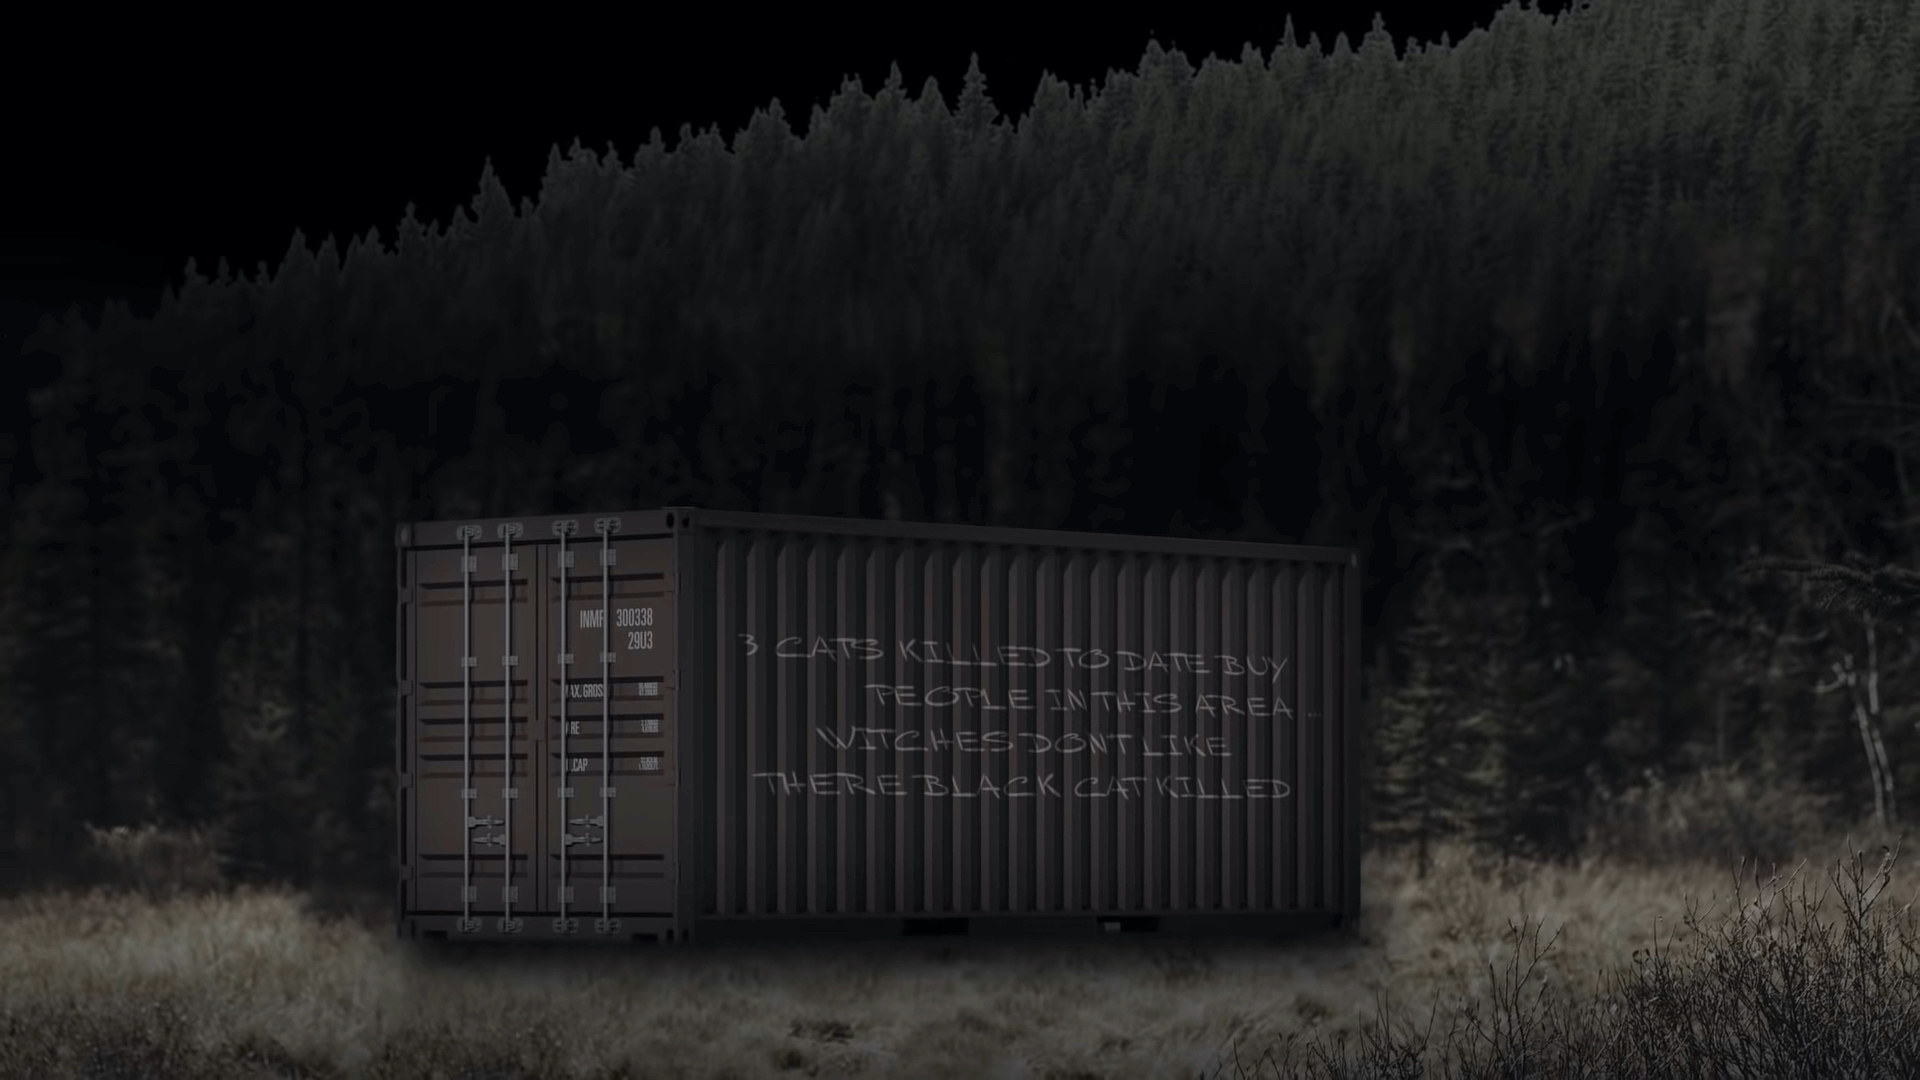 a storage container